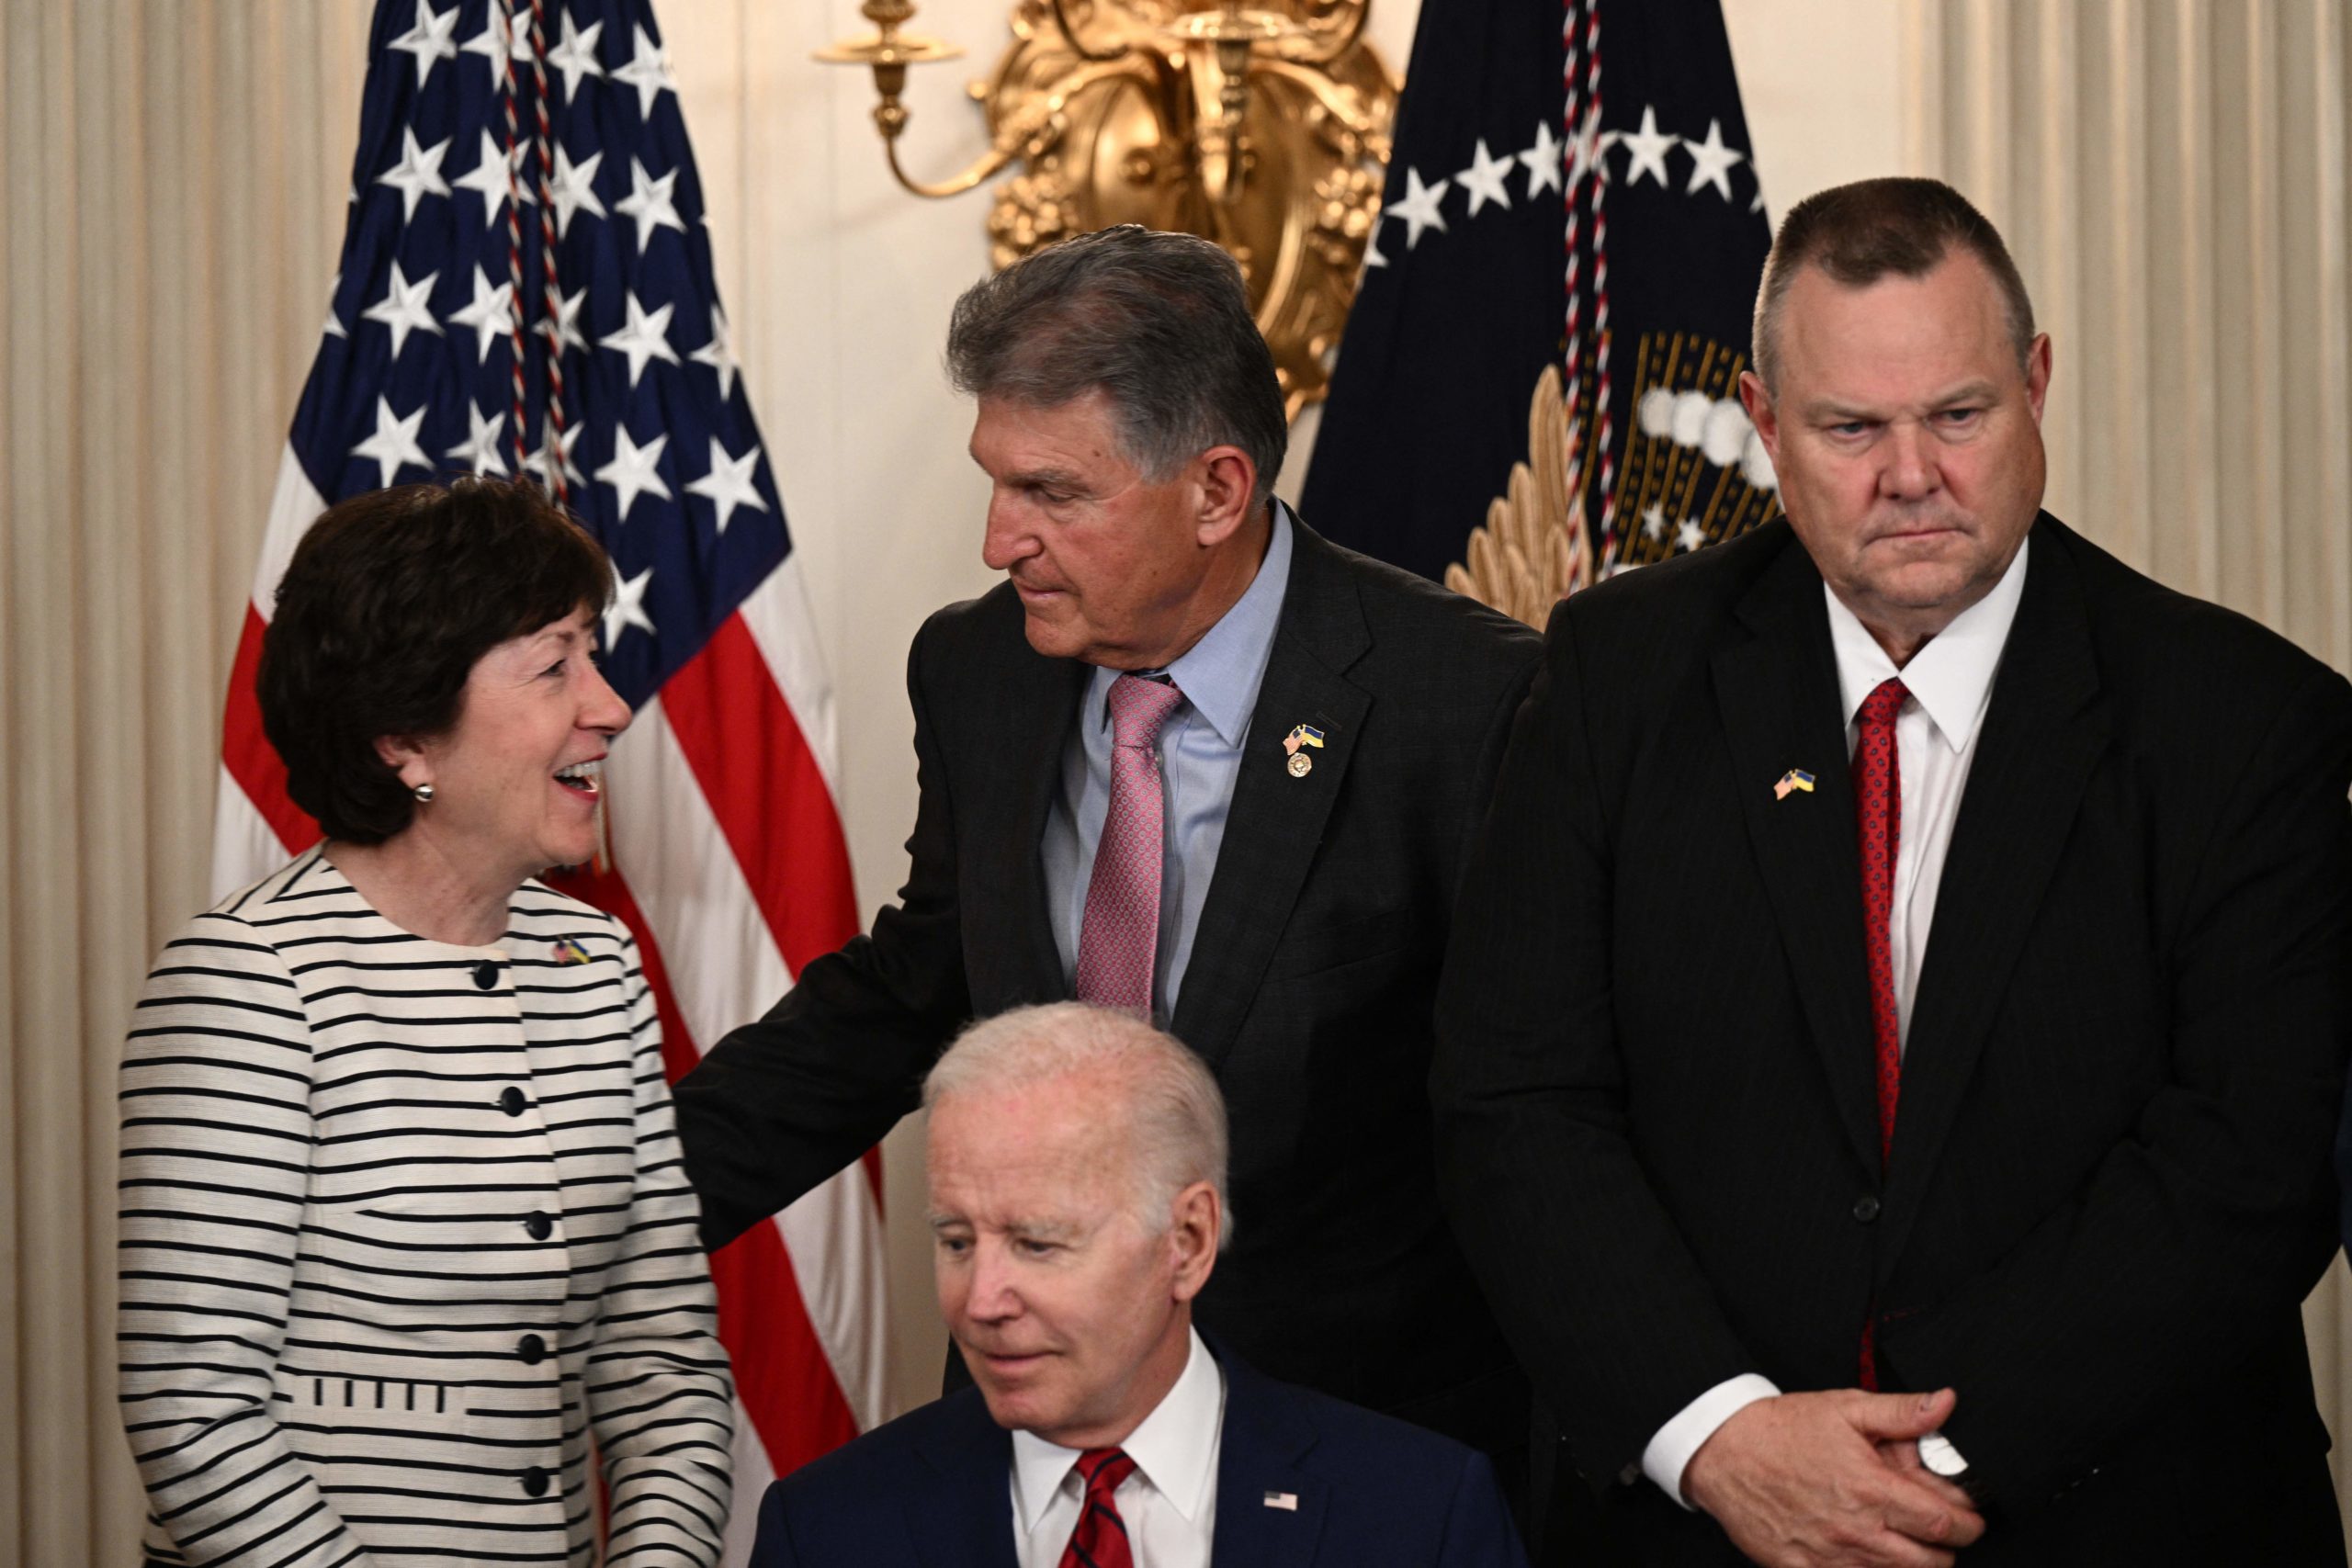 (L-R) US Senator Susan Collins (R-ME), US Senator Joe Manchin (D-WV), and US Senator Jon Tester (D-MT) stand behind US President Joe Biden during a signing ceremony in the State Dining Room of the White House in Washington, DC, on June 7, 2022. (Photo by BRENDAN SMIALOWSKI/AFP via Getty Images)